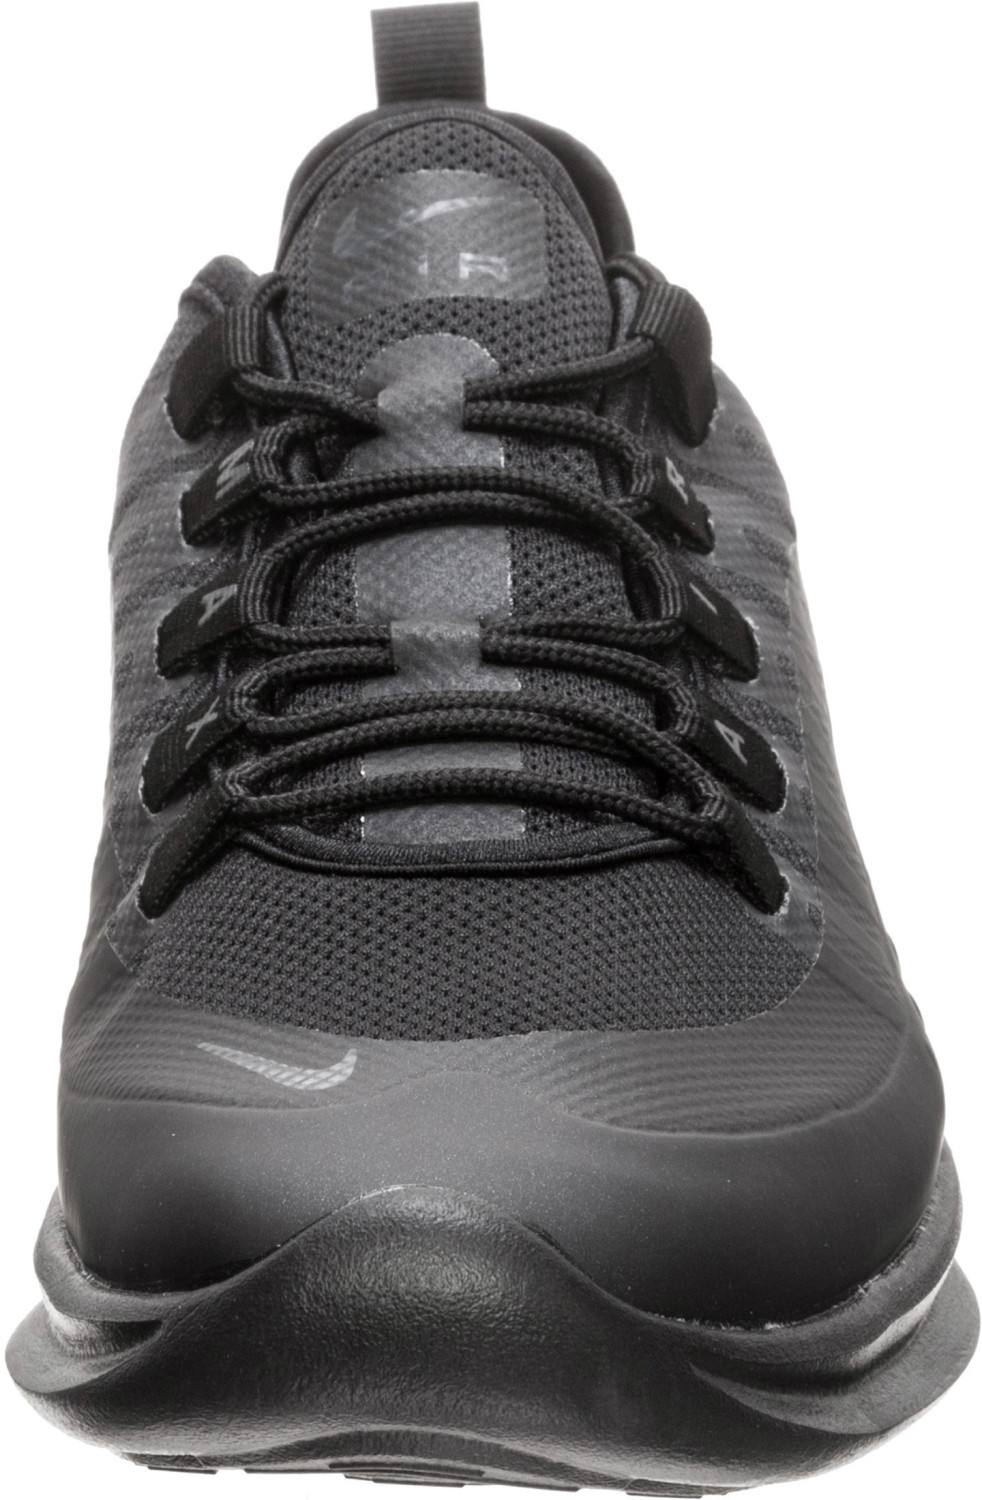 Buy Nike Air Max Axis black/black/black from £84.99 (Today) – Best ...